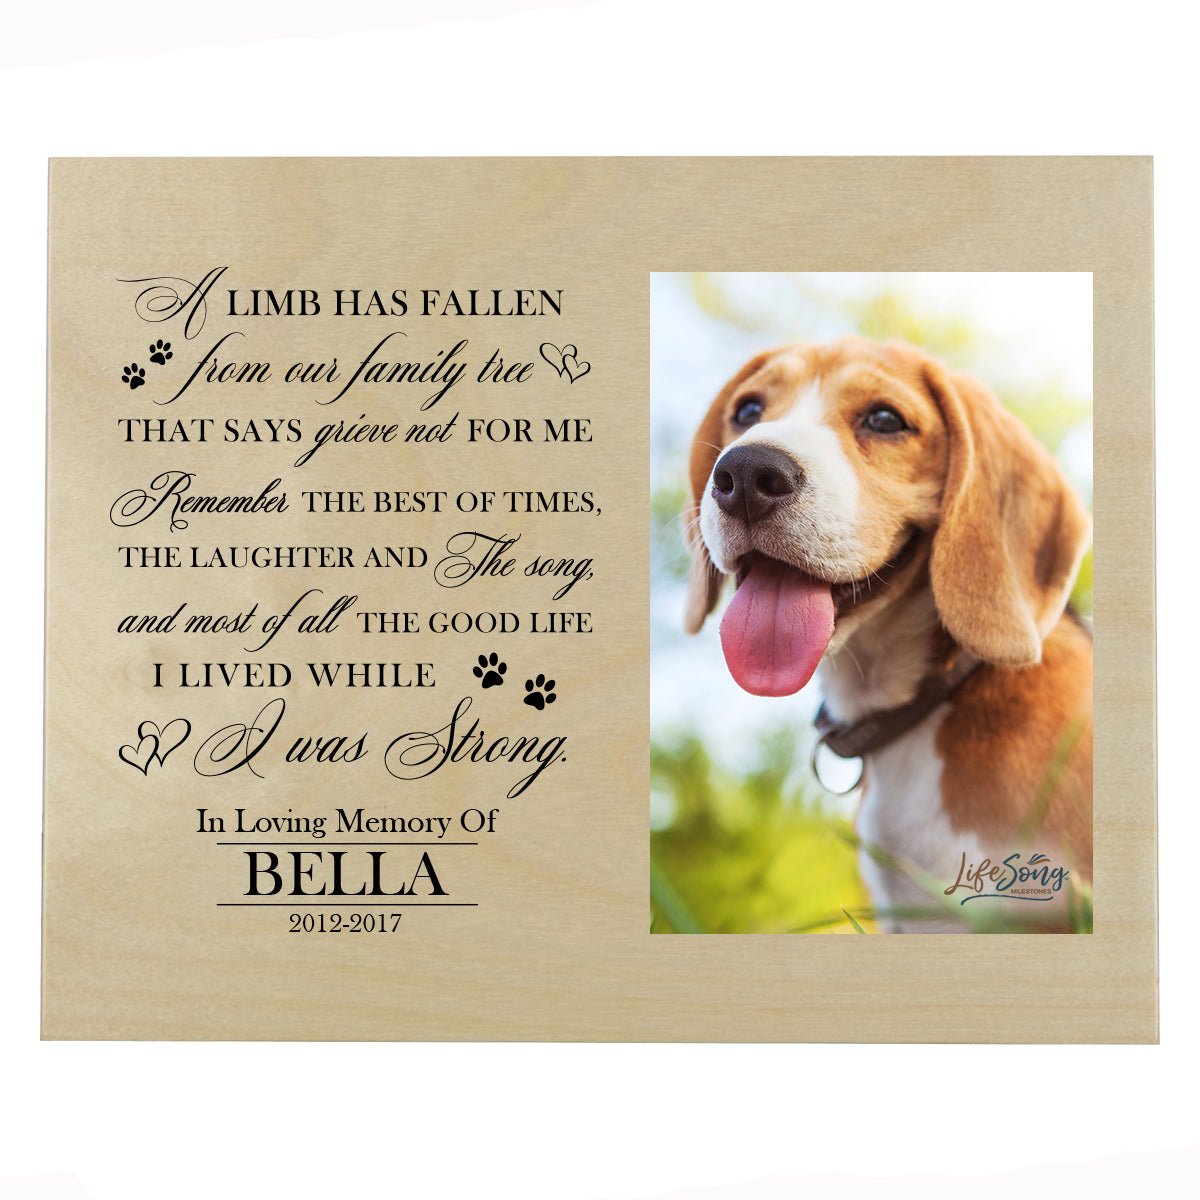 Pet Memorial Photo Wall Plaque Décor - A Limb Has Fallen From Our Family Tree - LifeSong Milestones